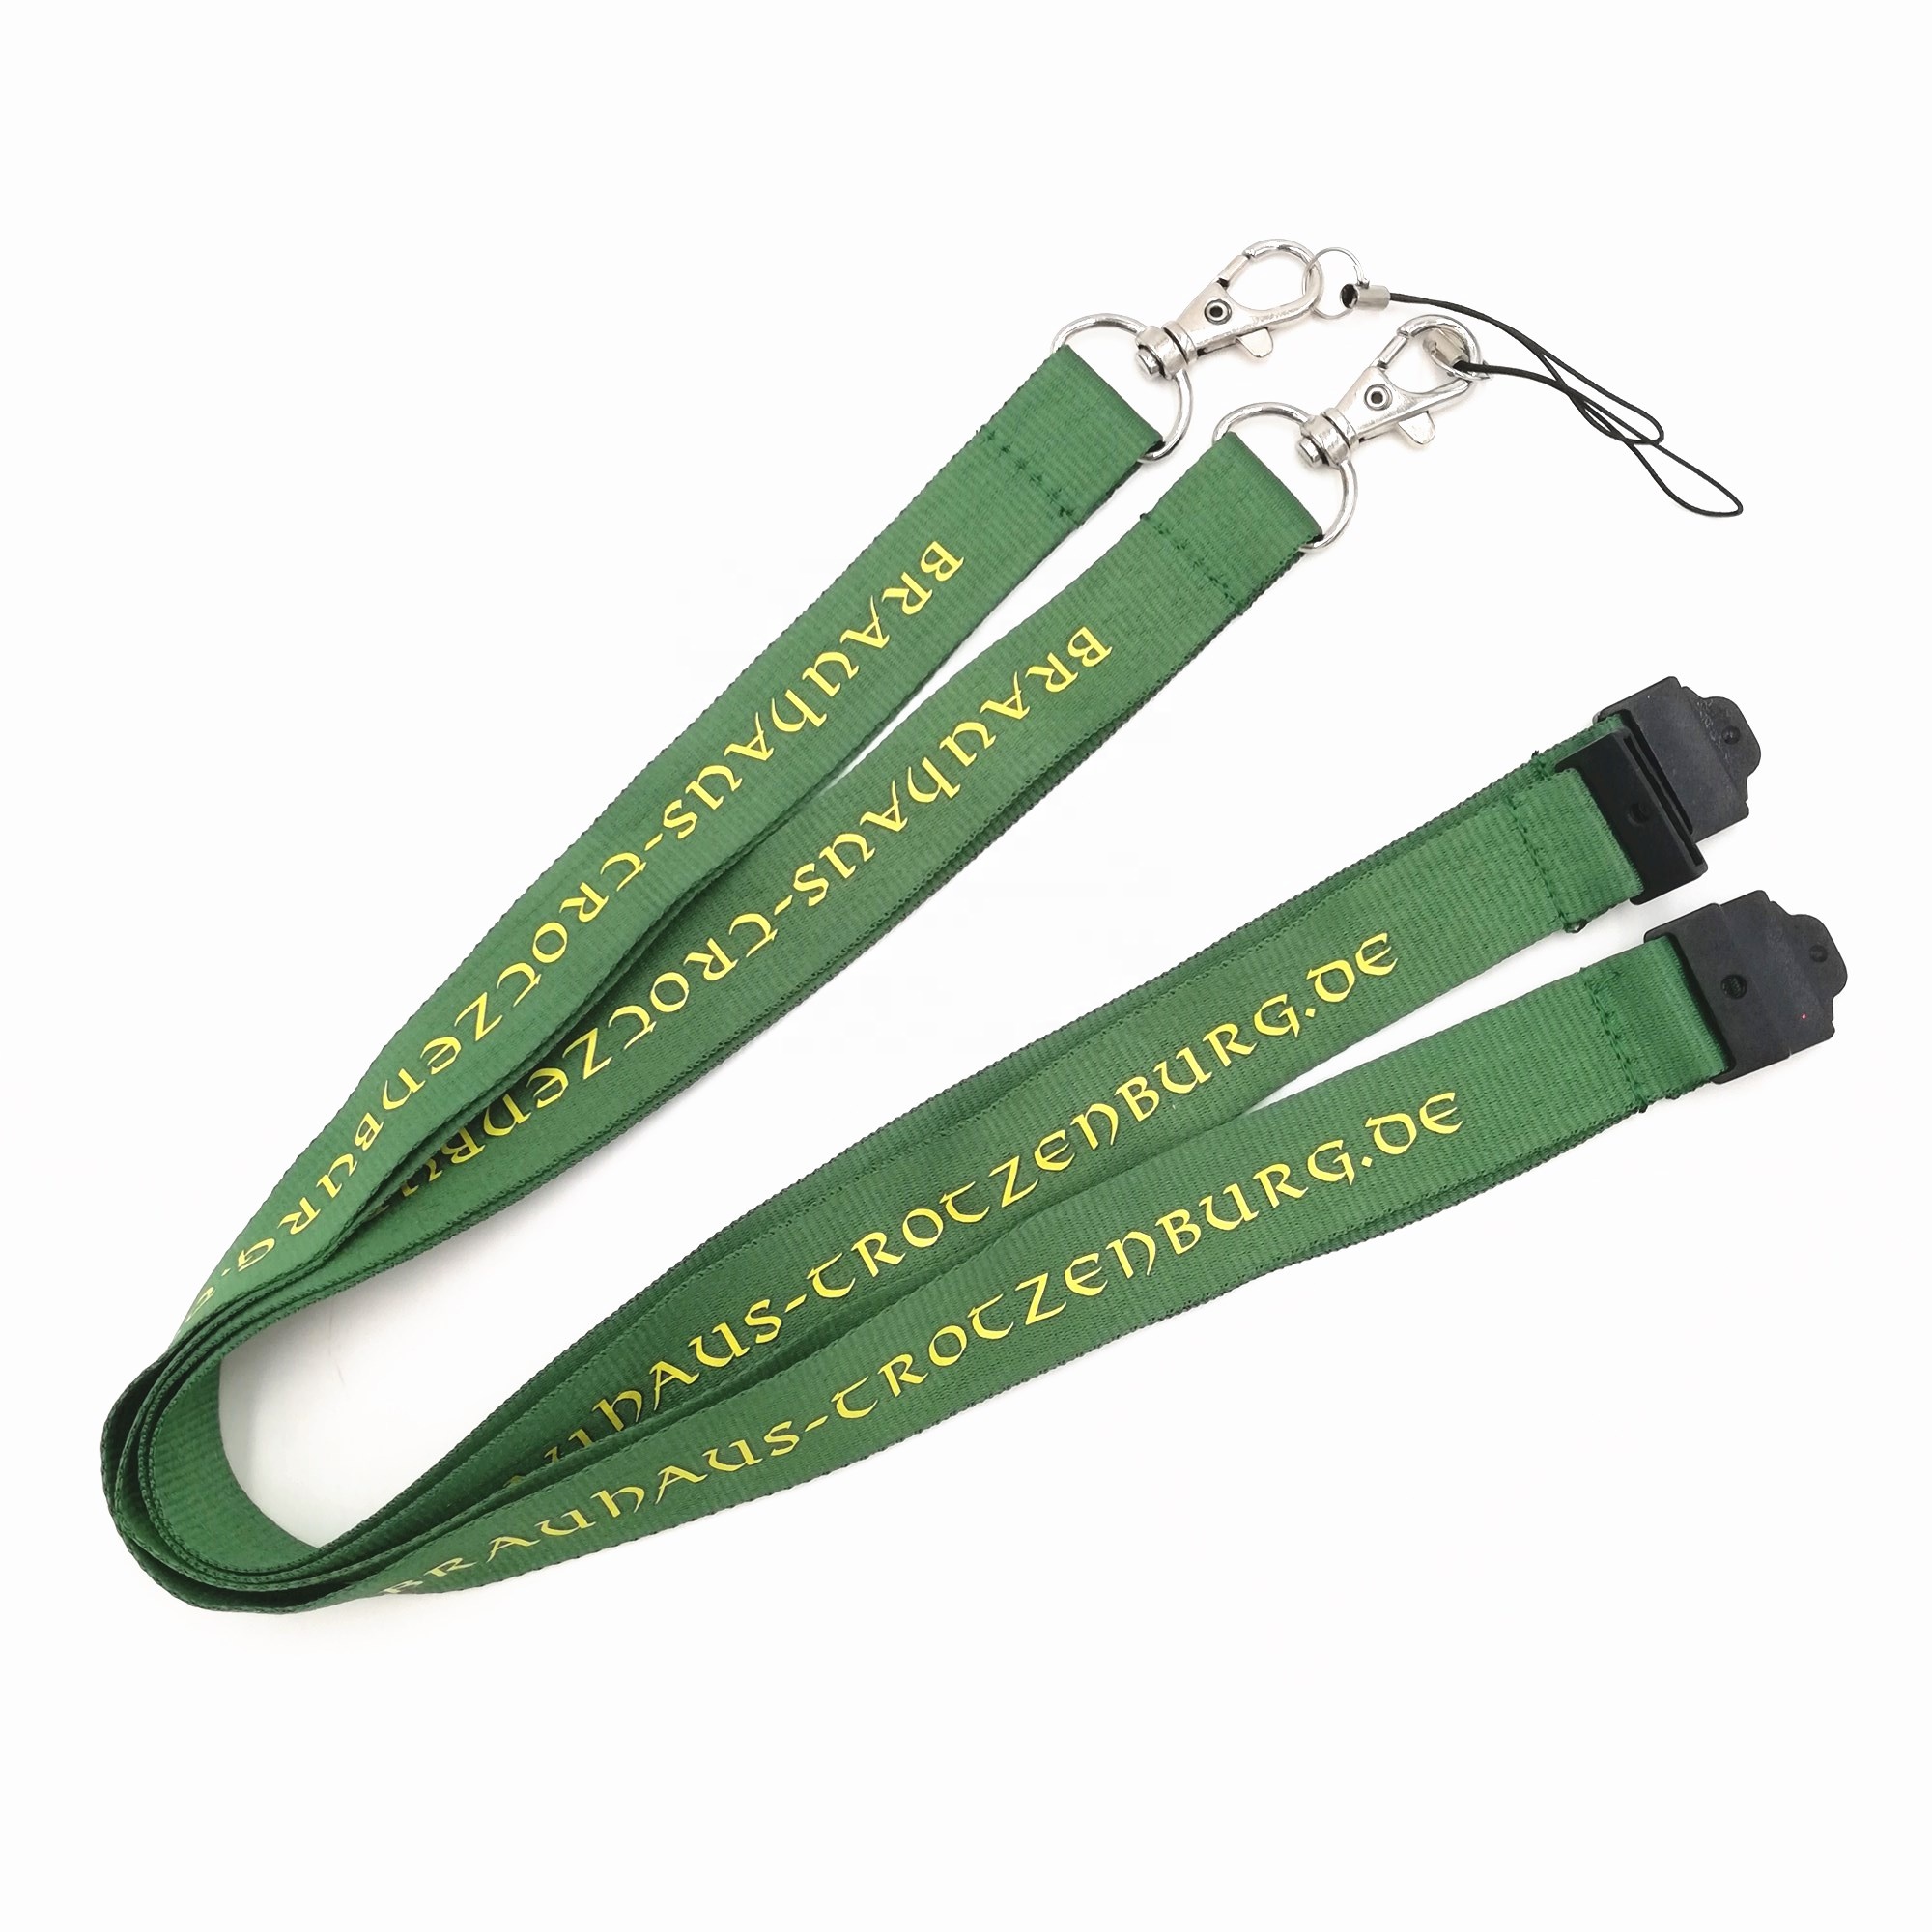 Carnival personalized silk printing phone cord lanyard for phone